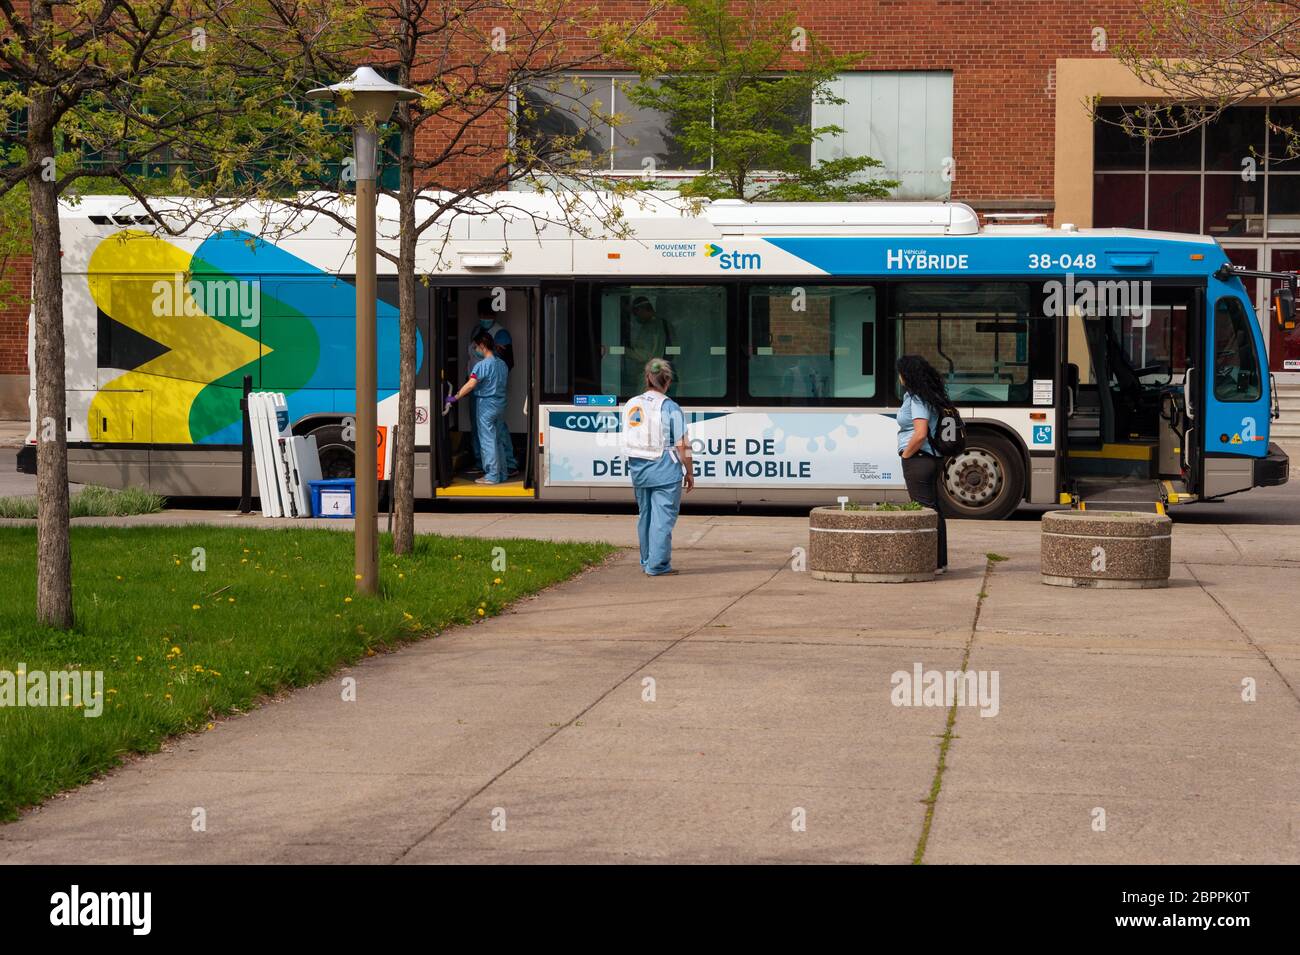 Montreal, CA - 19 May 2020: A STM city bus transformed into a mobile COVID-19 testing clinic on Fullum Street Stock Photo